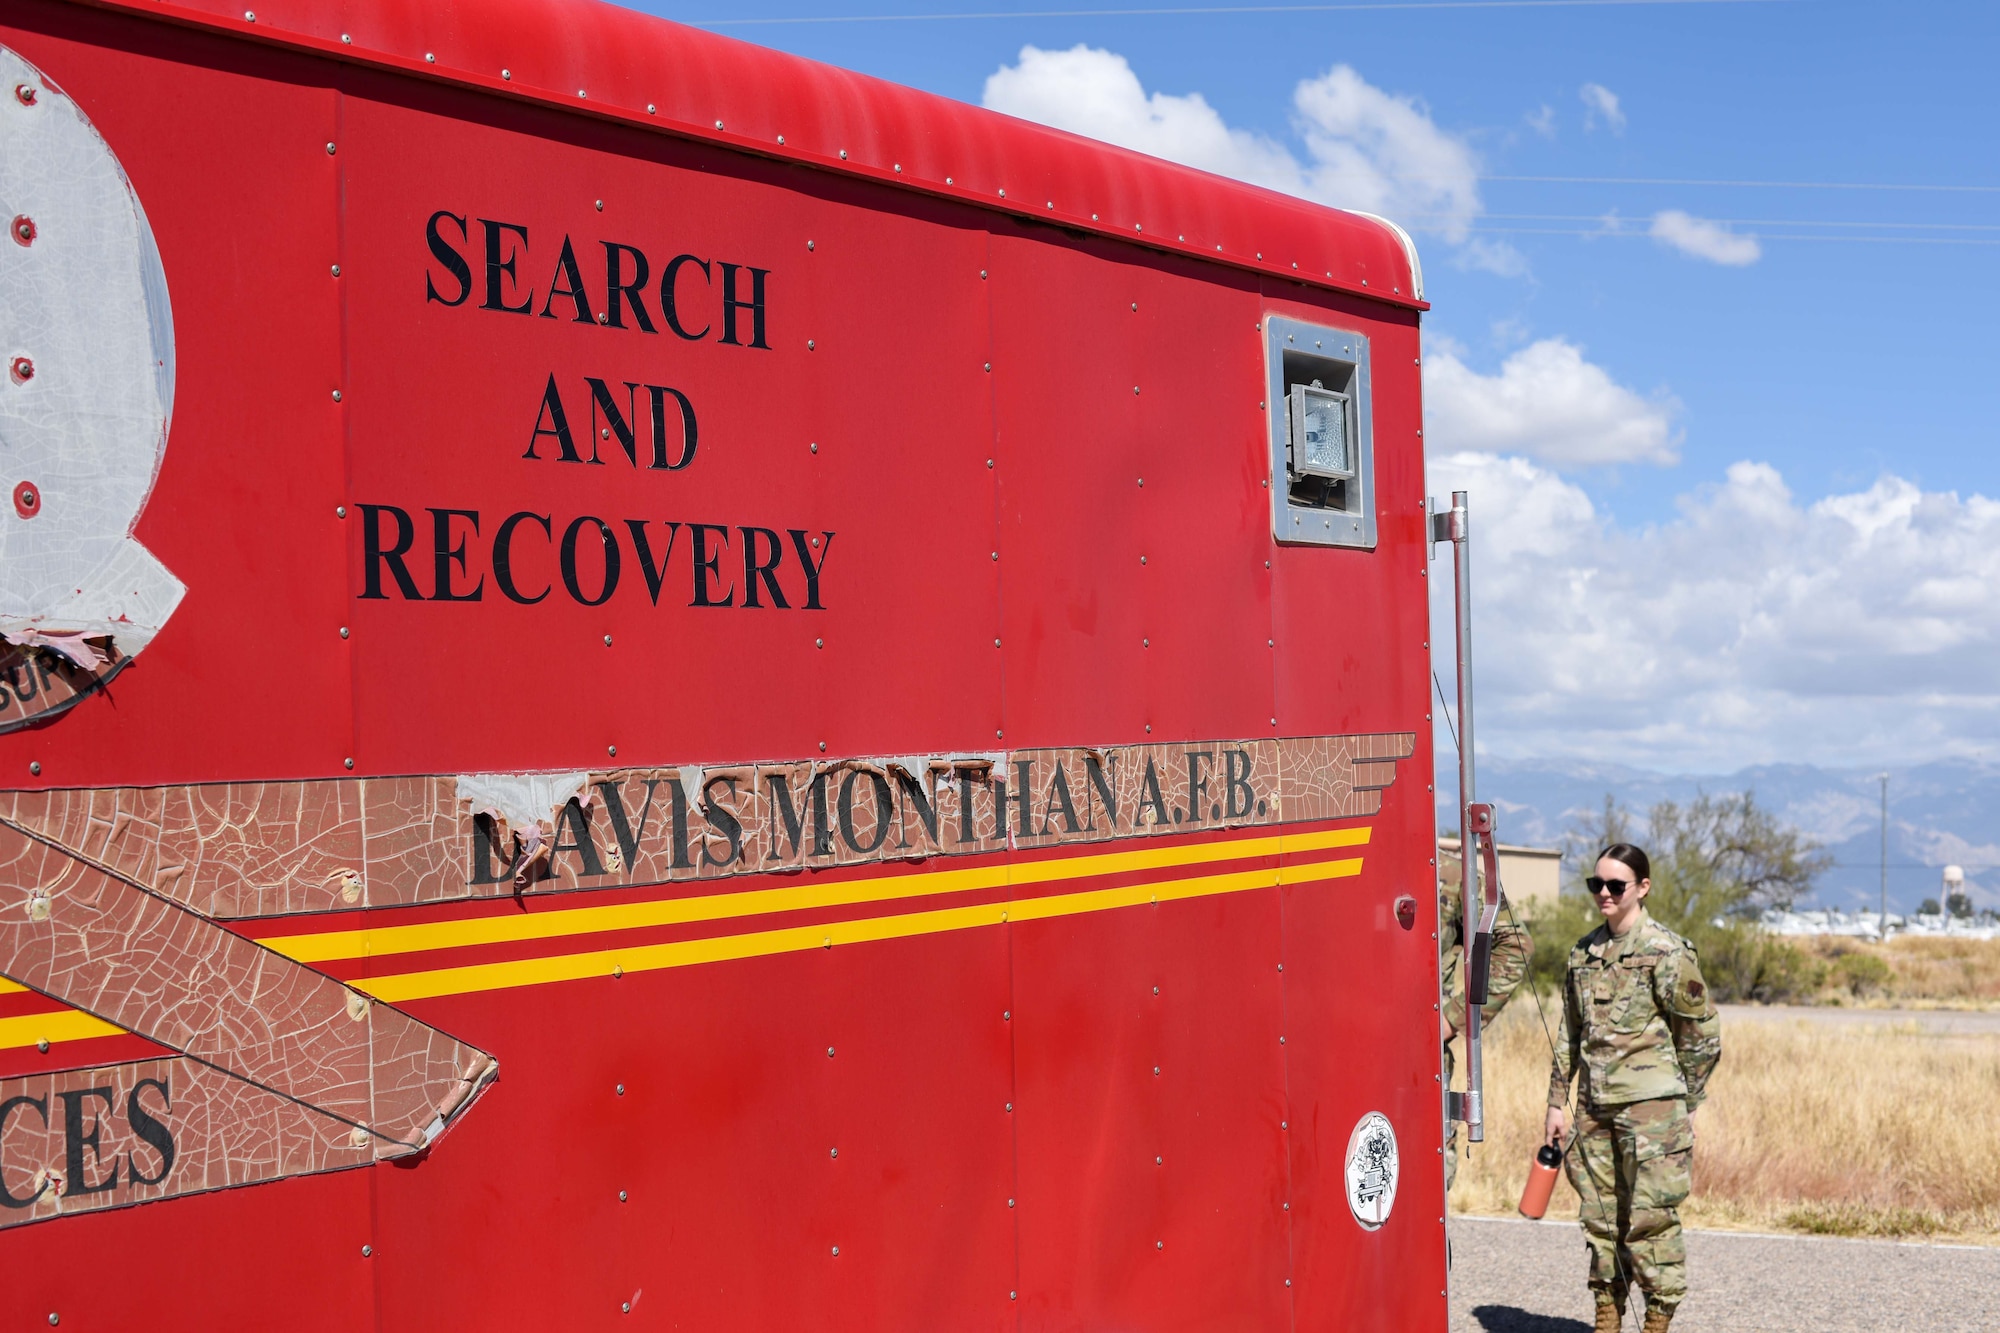 A photo of a search and recovery vehicle.